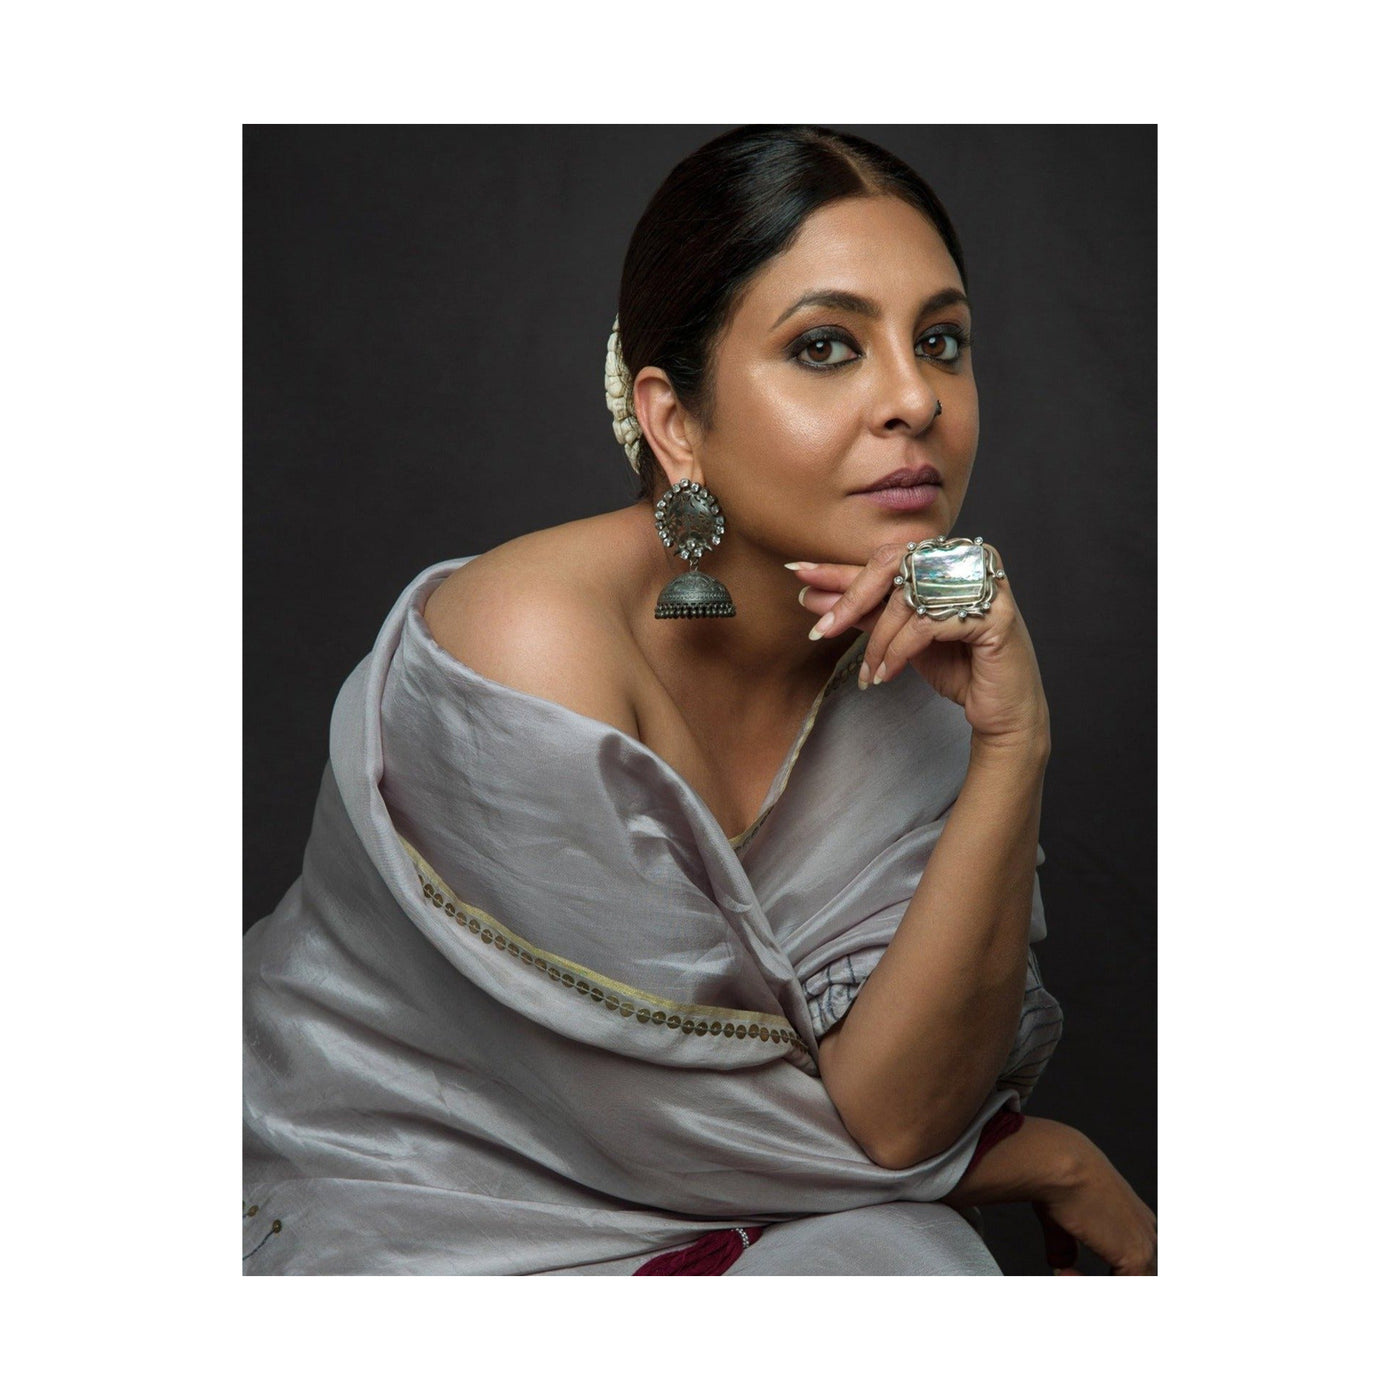 Shefali Shah in Sangeeta Boochra Silver Ring Studded With Mother Of Pearl Stone And Earrings